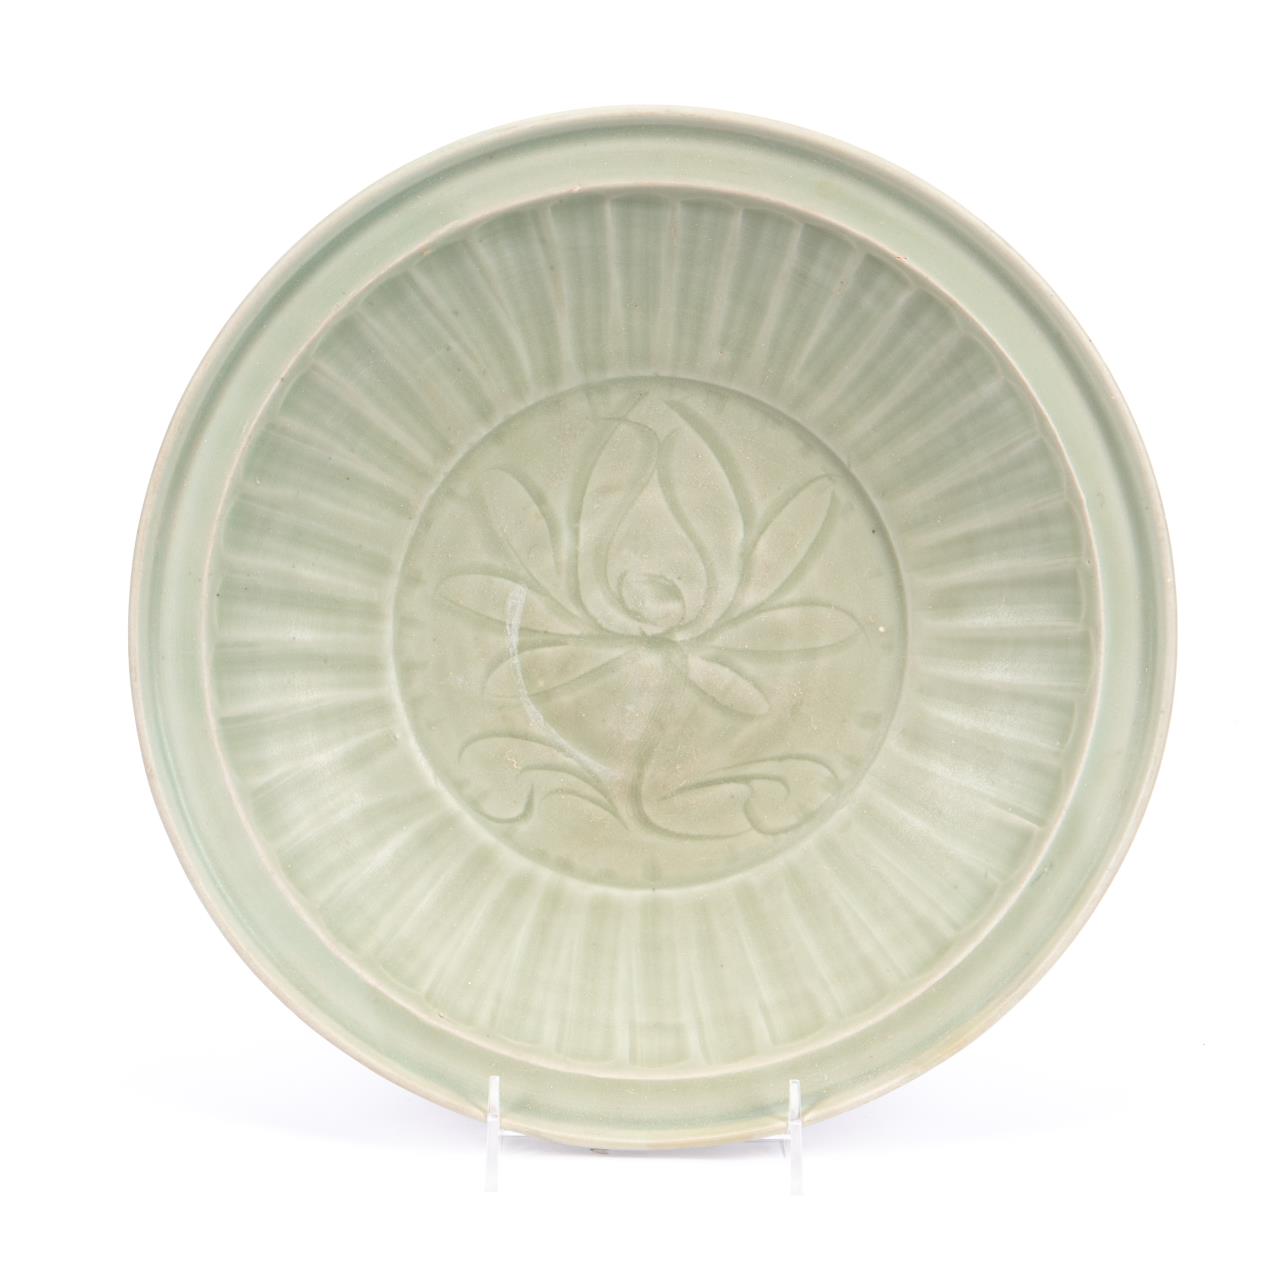 CHINESE CELADON GLAZED FLORAL CHARGER 35d7ab